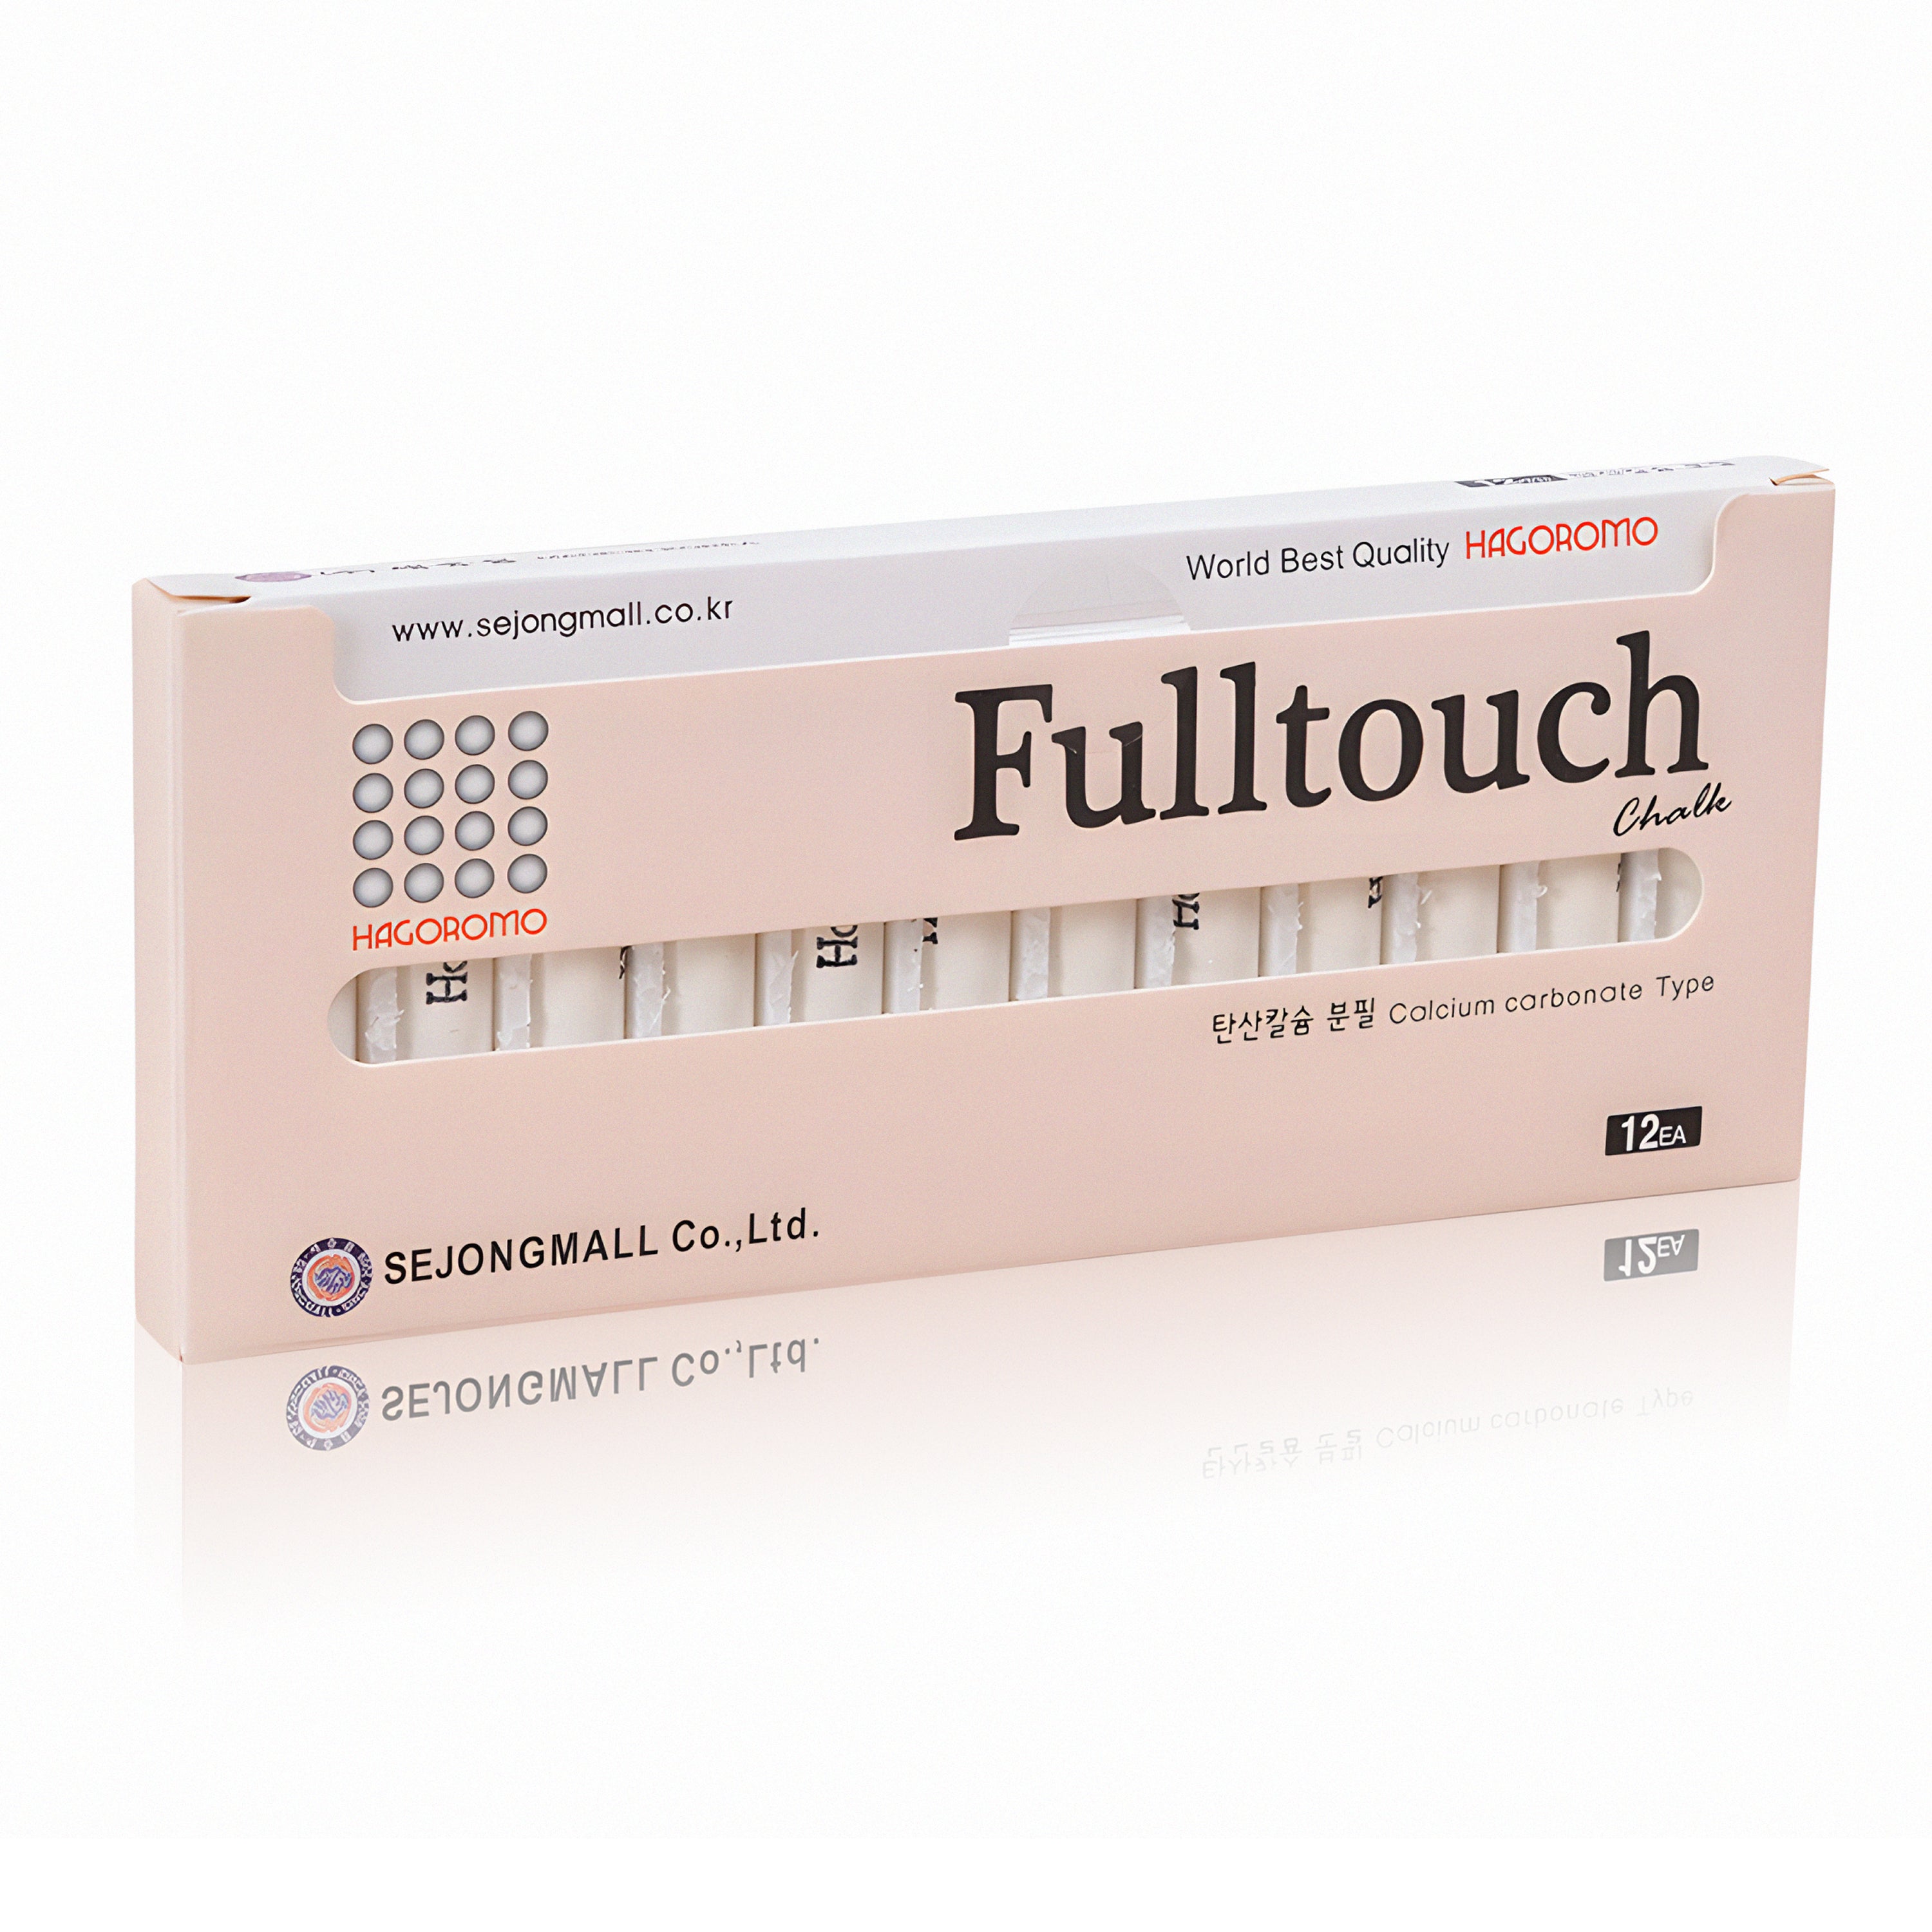 Hagoromo Fulltouch White Chalk 5pcs (1 Box). with Great Color Visibility  and Smoothness. Very Solid and Strong